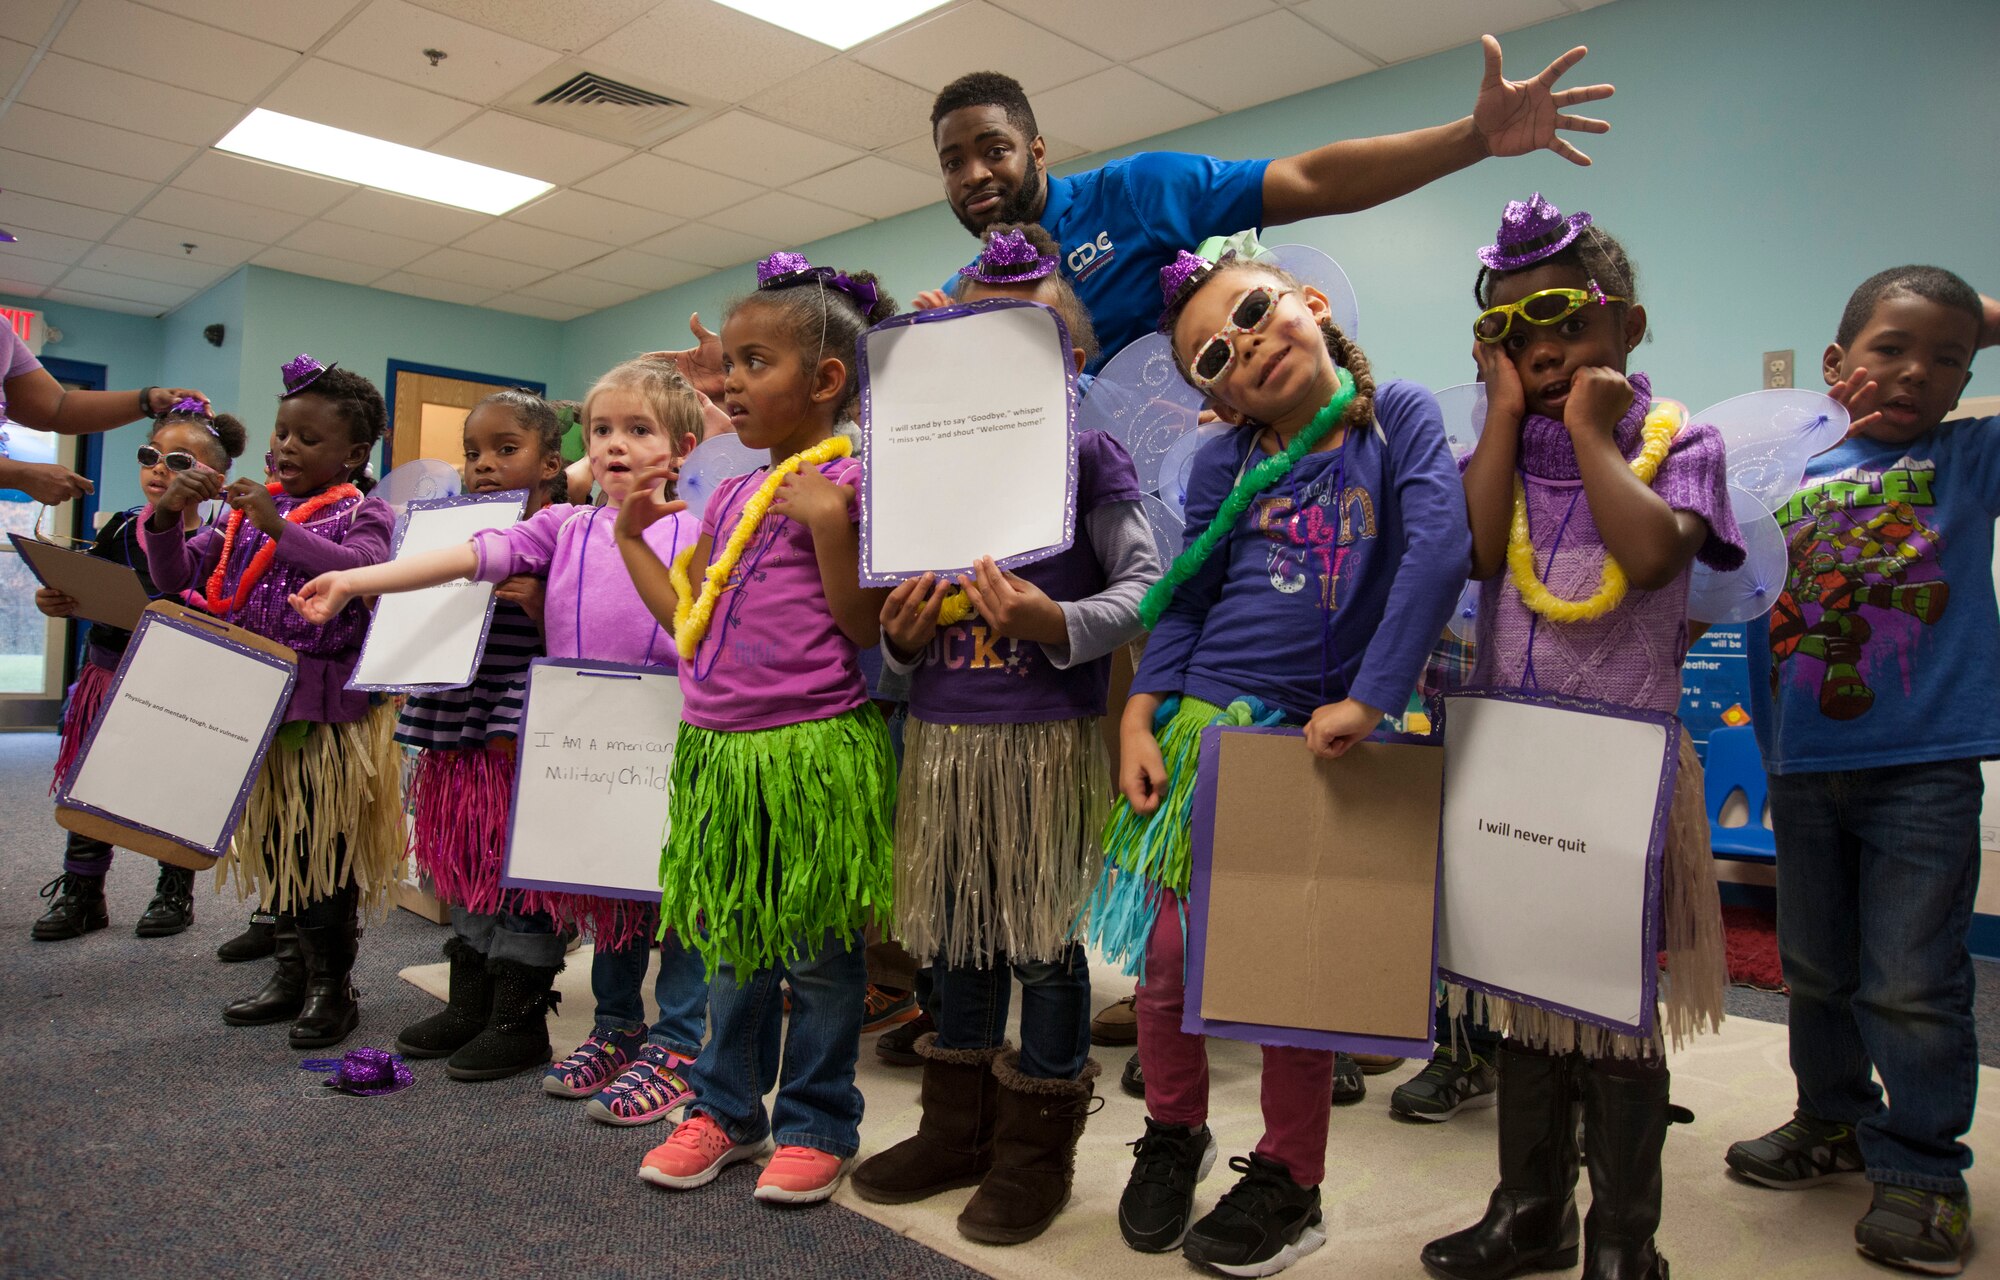 Terrell Dean, teacher’s assistant, and students celebrate the month of the military child at the Joint Base Andrews Child Development Center Three April 7, 2016. The students and faculty participated in a “purple” parade to kick of the month long celebration to honor military youth for the important role they play in contributing to the strength of the military family. The children wore placards that contained the Military Child’s Creed. (U.S. Air Force photo by Airman 1st Class Rustie Kramer/Released)